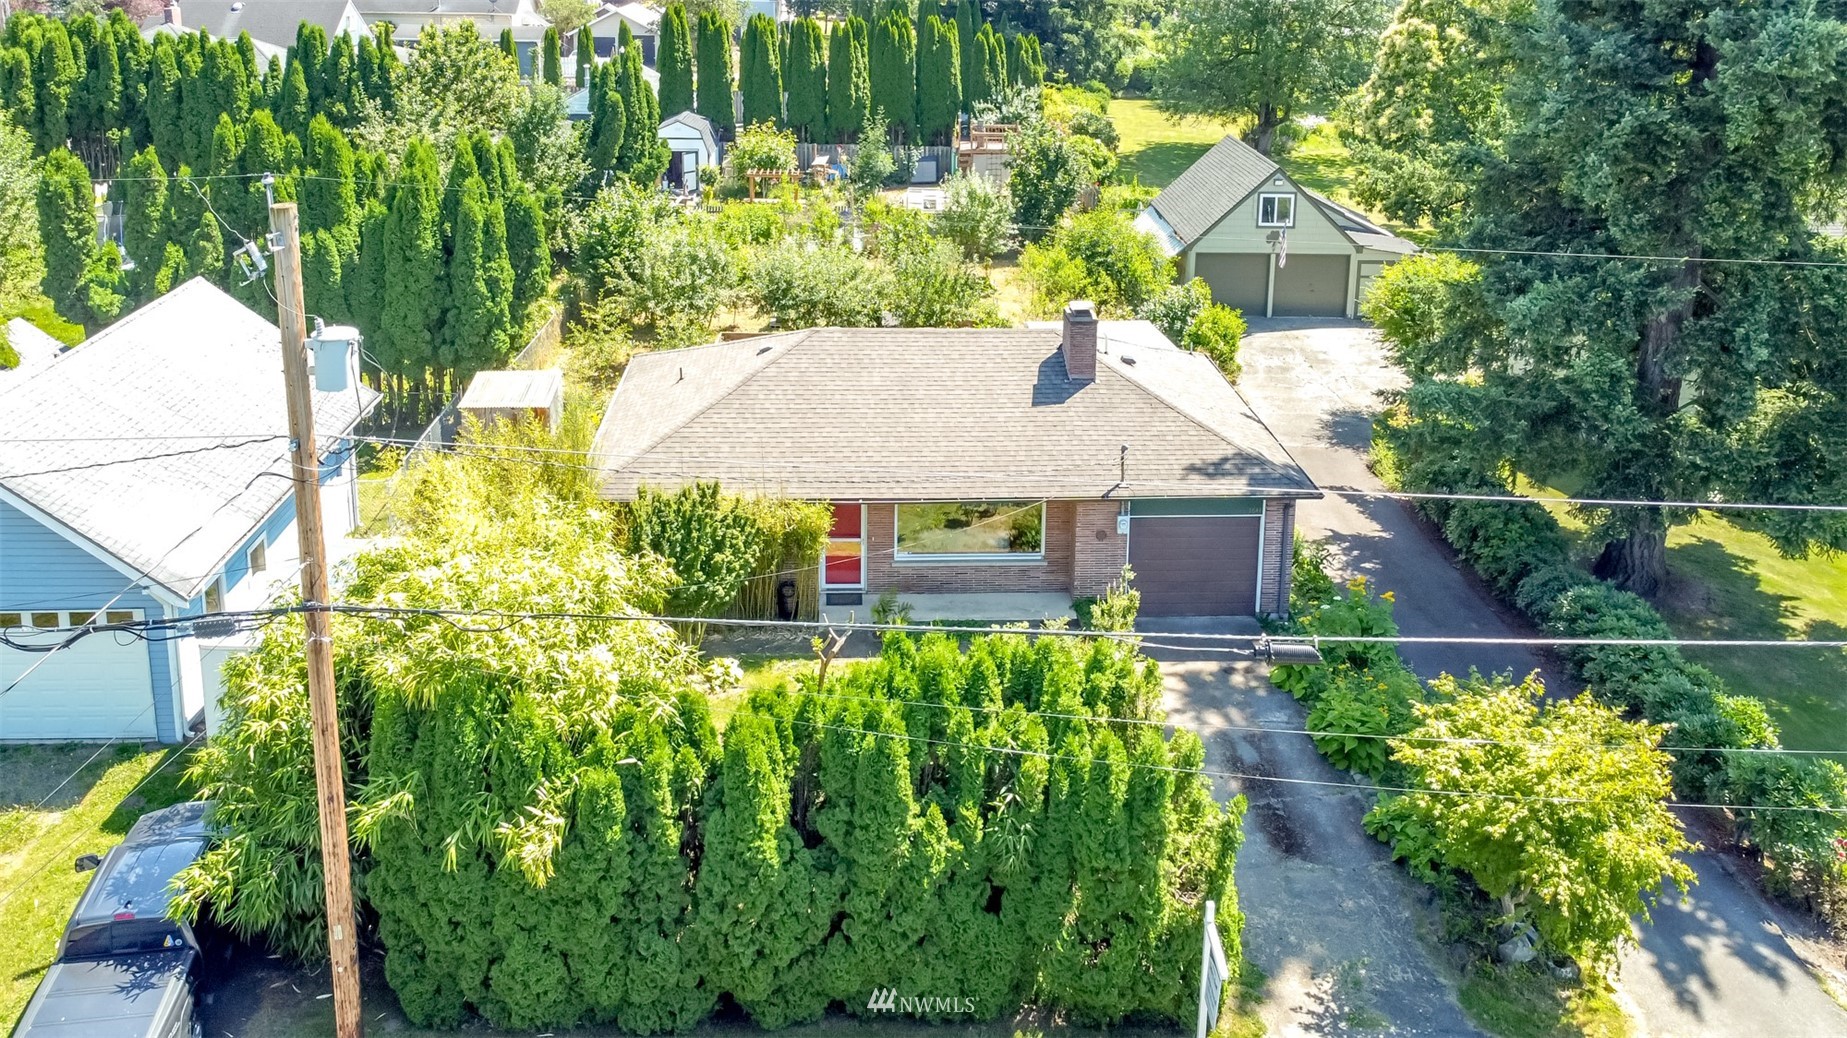 a aerial view of a house with a yard and plants